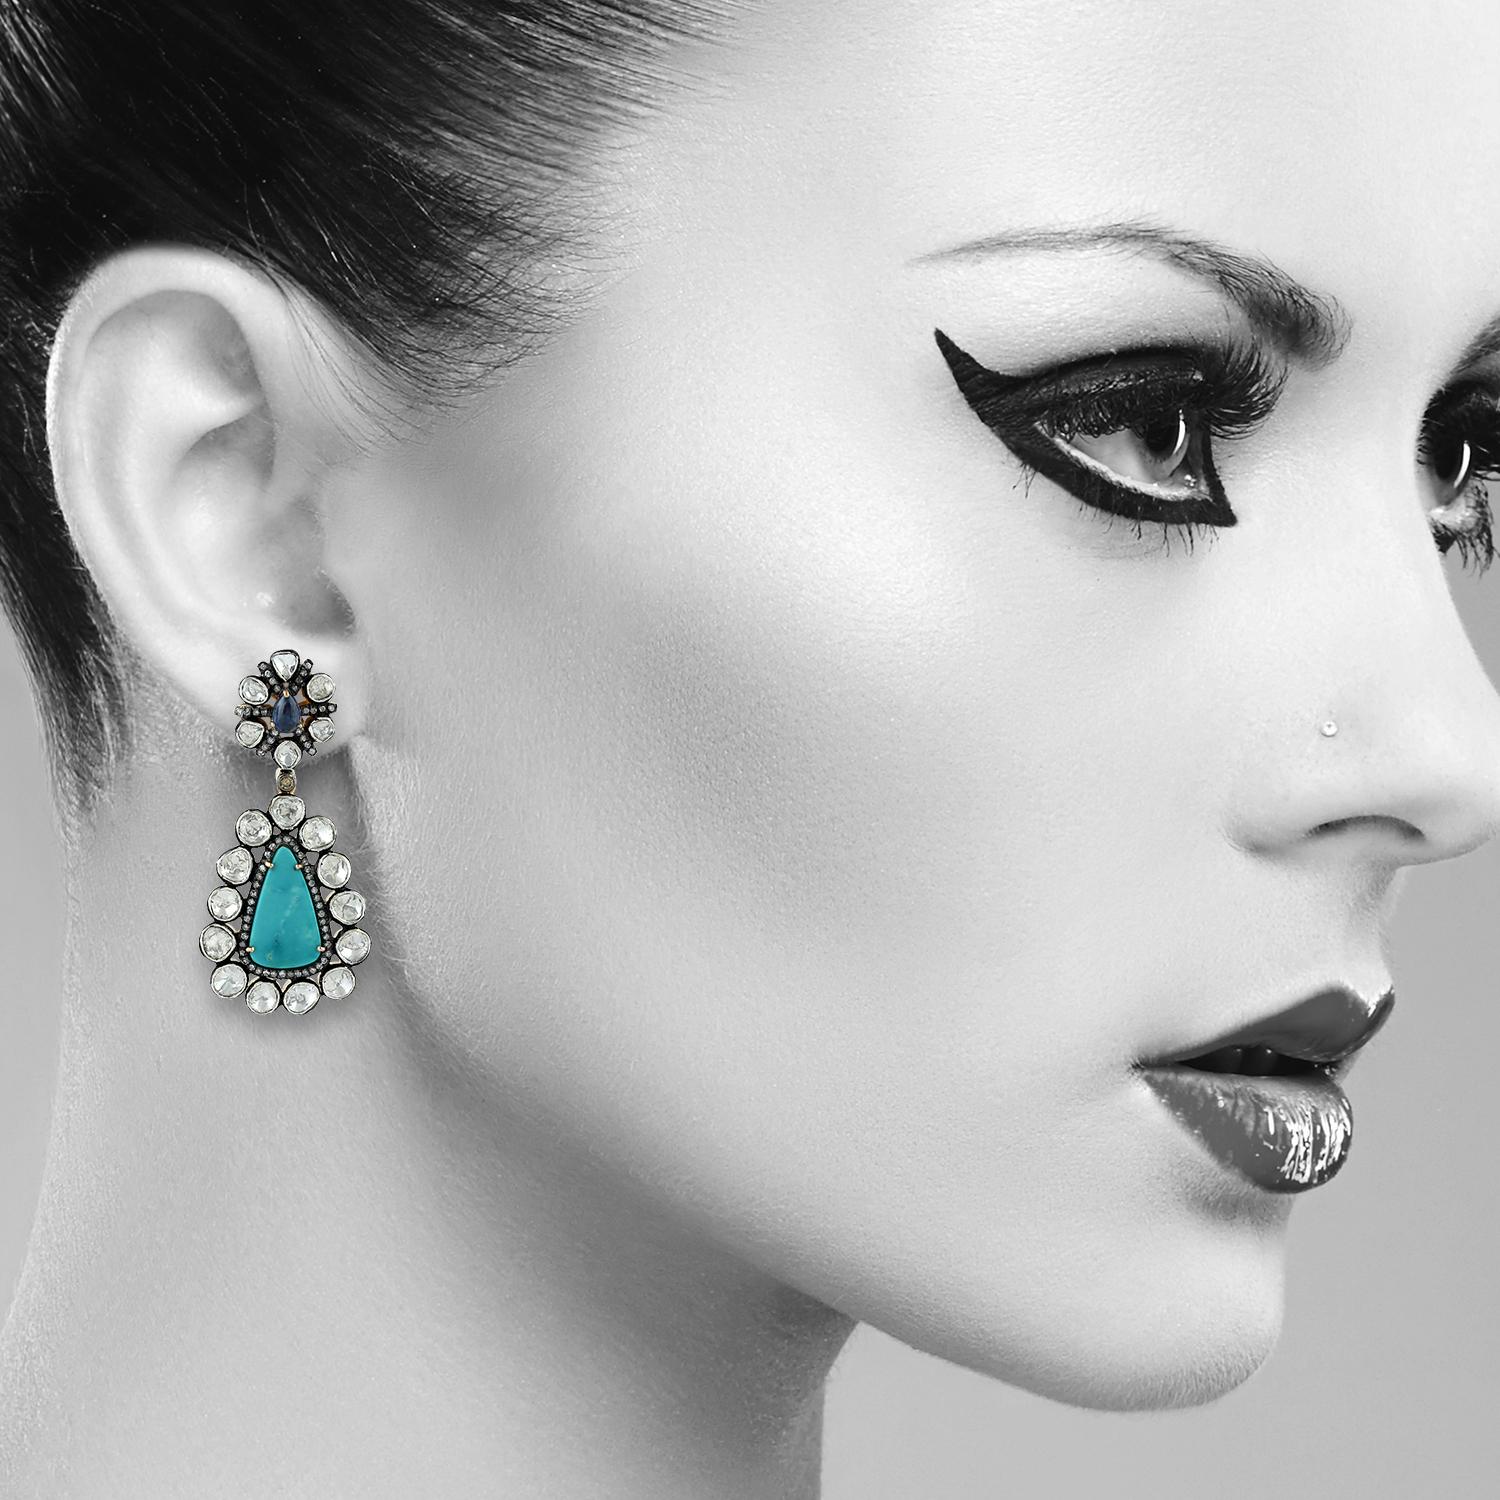 Cast from 18K gold and sterling silver,  these beautiful earrings are set with 7.3 carats turquoise, 1.15 carats sapphire and 7.37 carats rose cut diamonds with blackened finish.

FOLLOW  MEGHNA JEWELS storefront to view the latest collection &